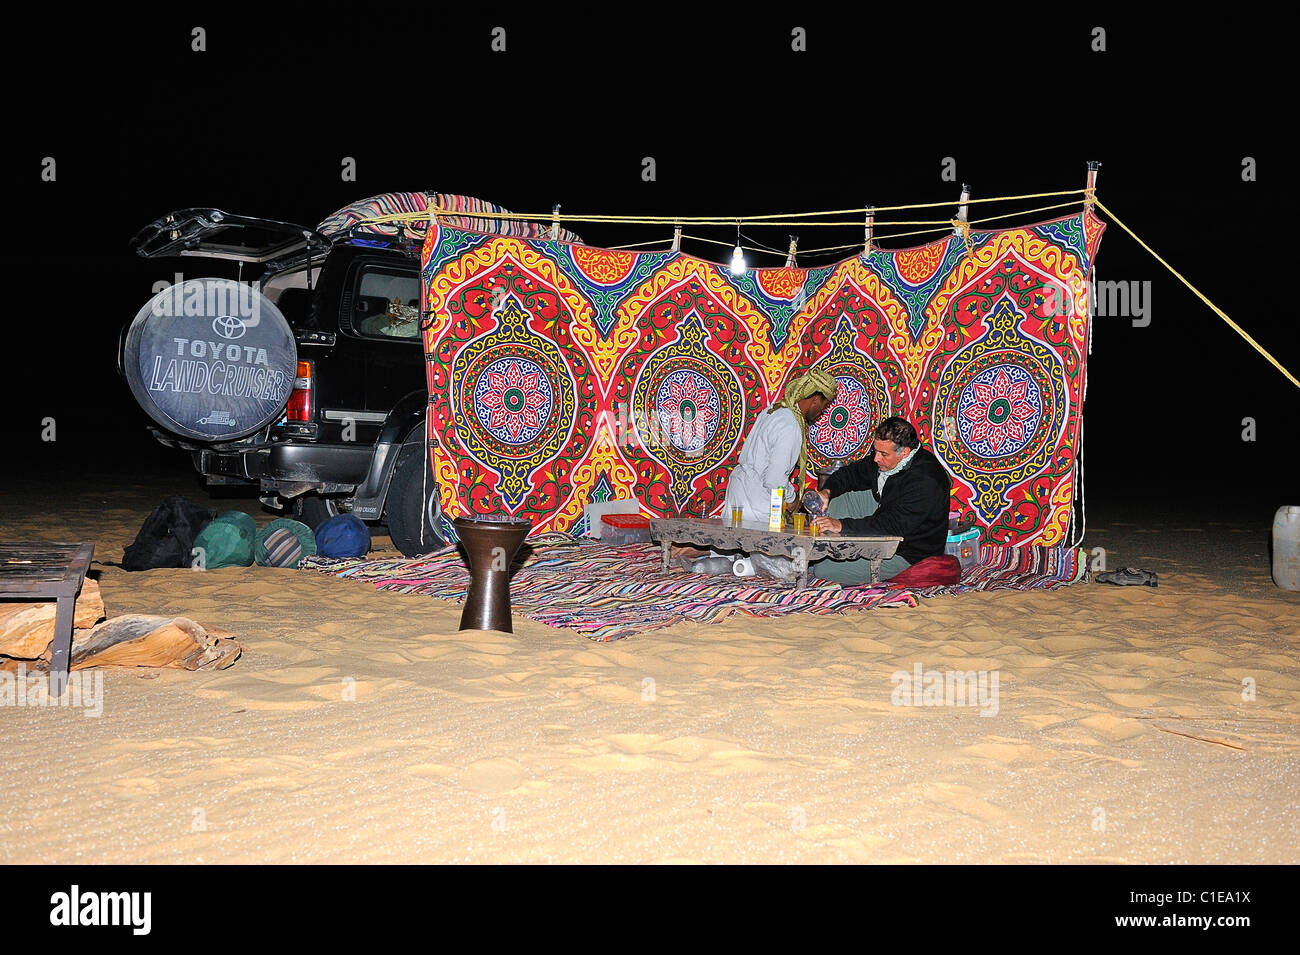 Tourist camp at night for an overnight stay in the White Desert national park, Egypt Stock Photo